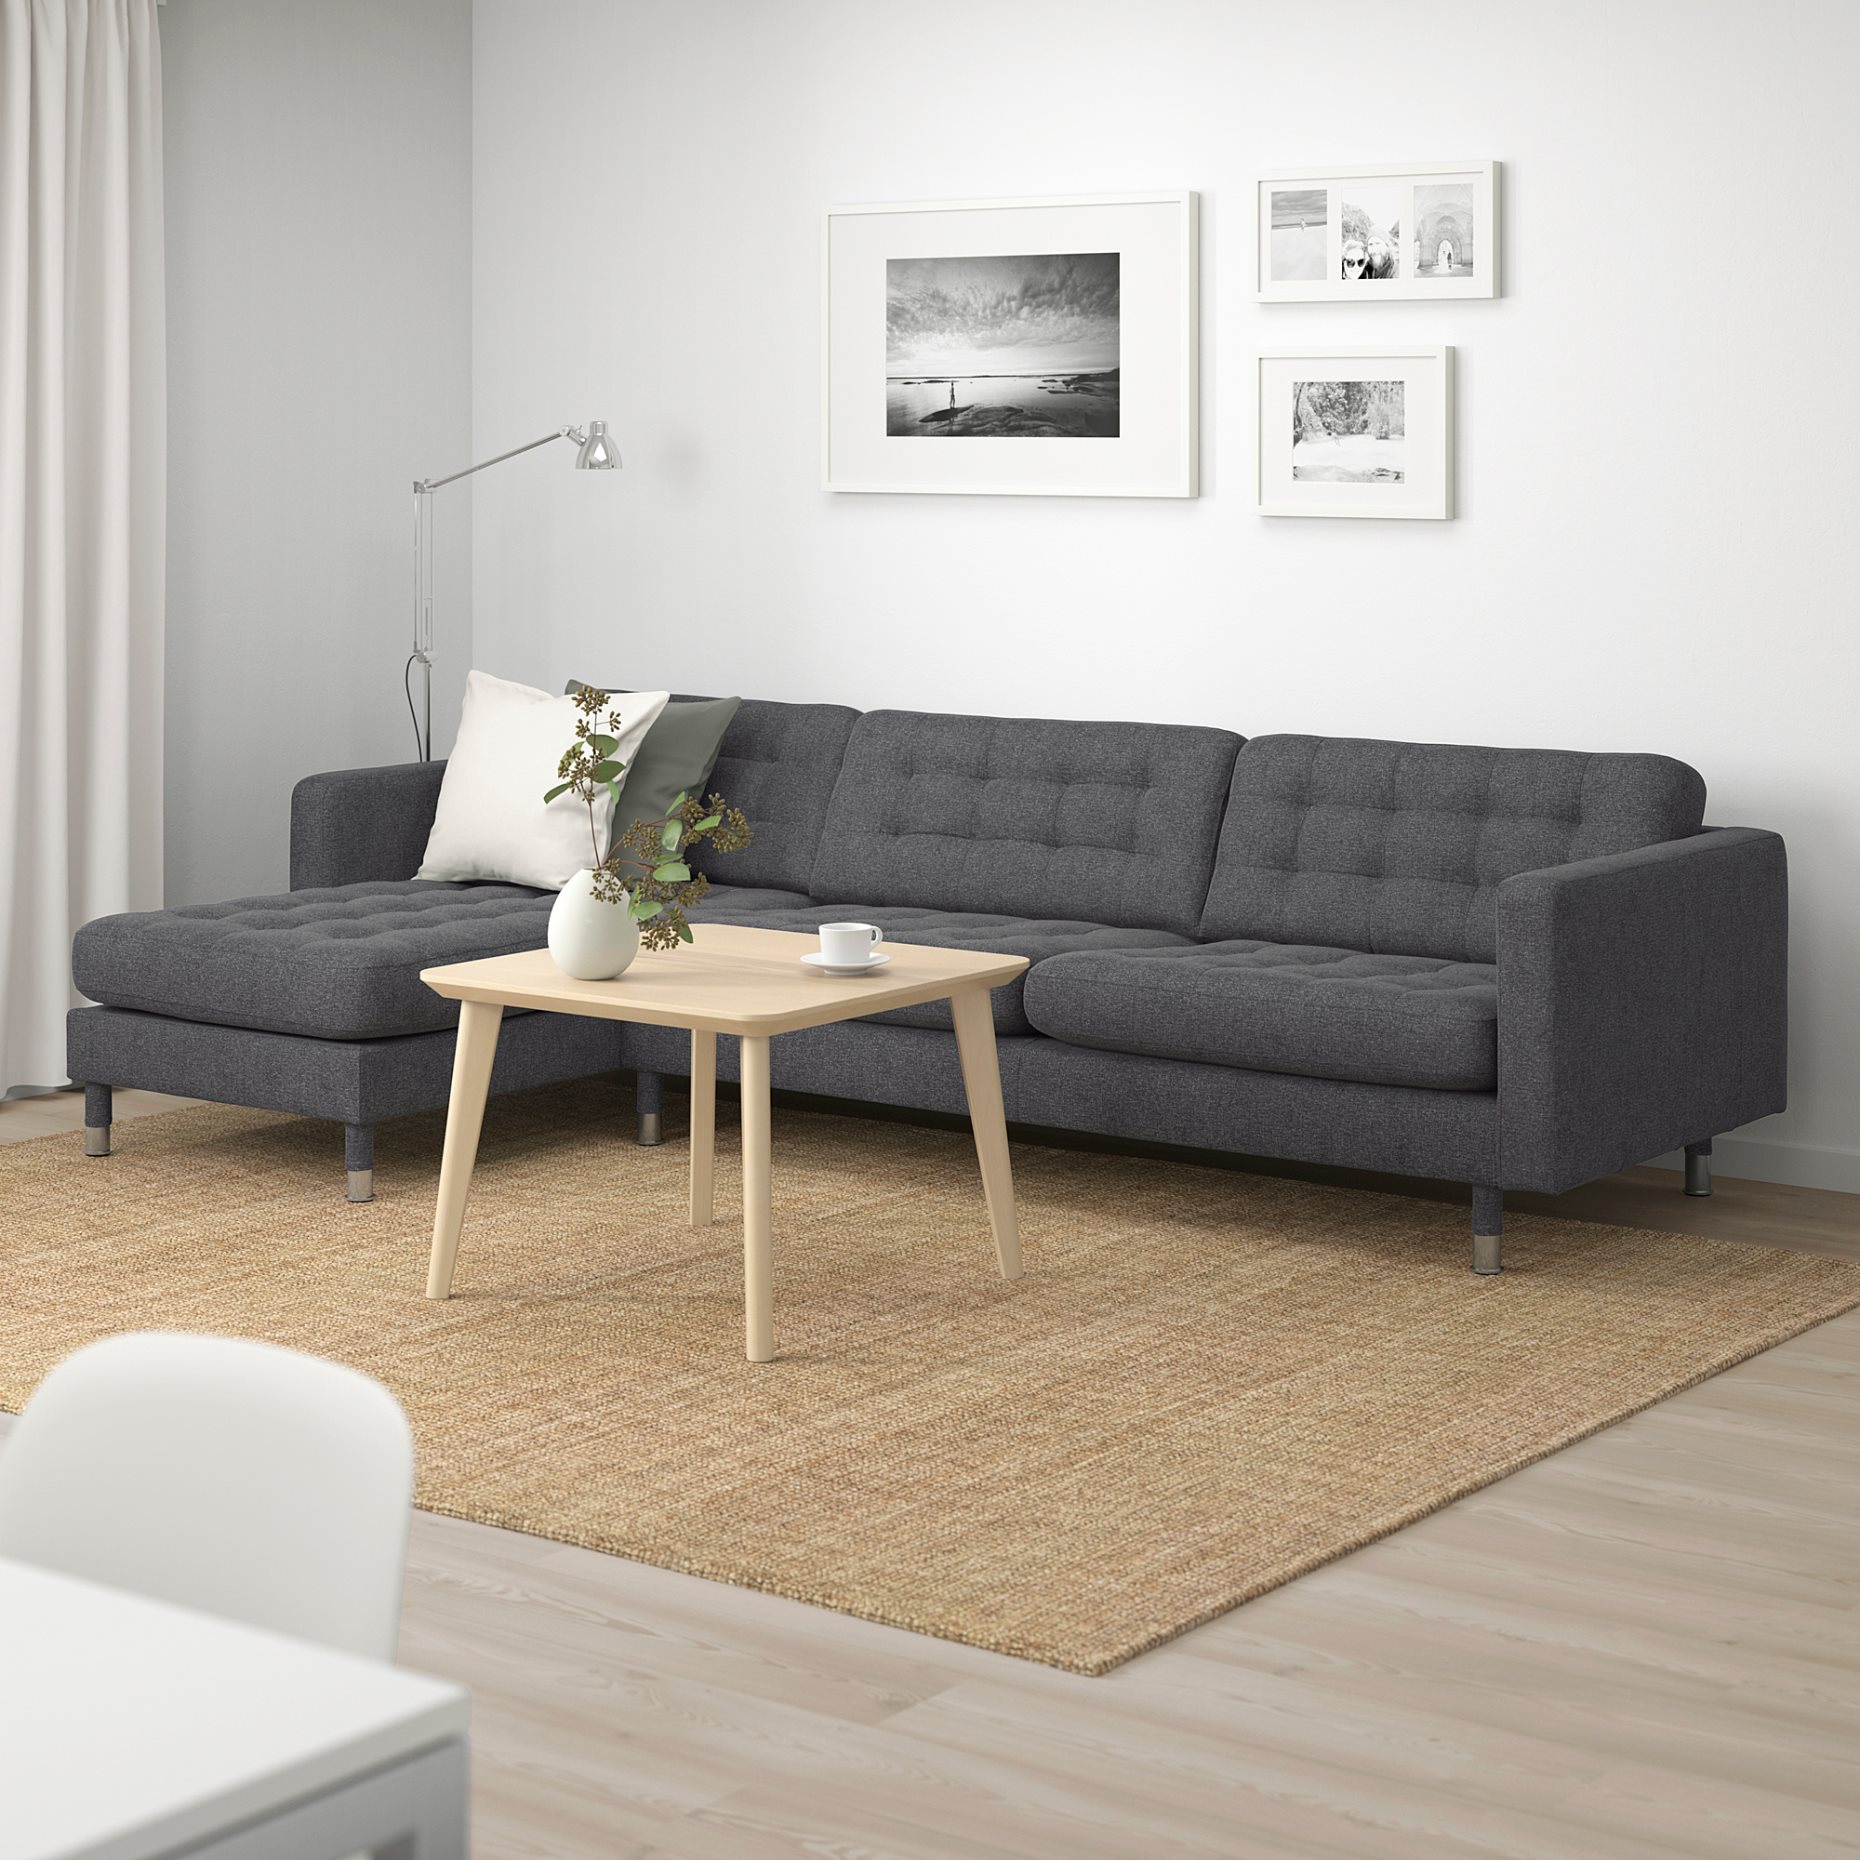 LANDSKRONA, 4-seat sofa with chaise longue, 792.703.72